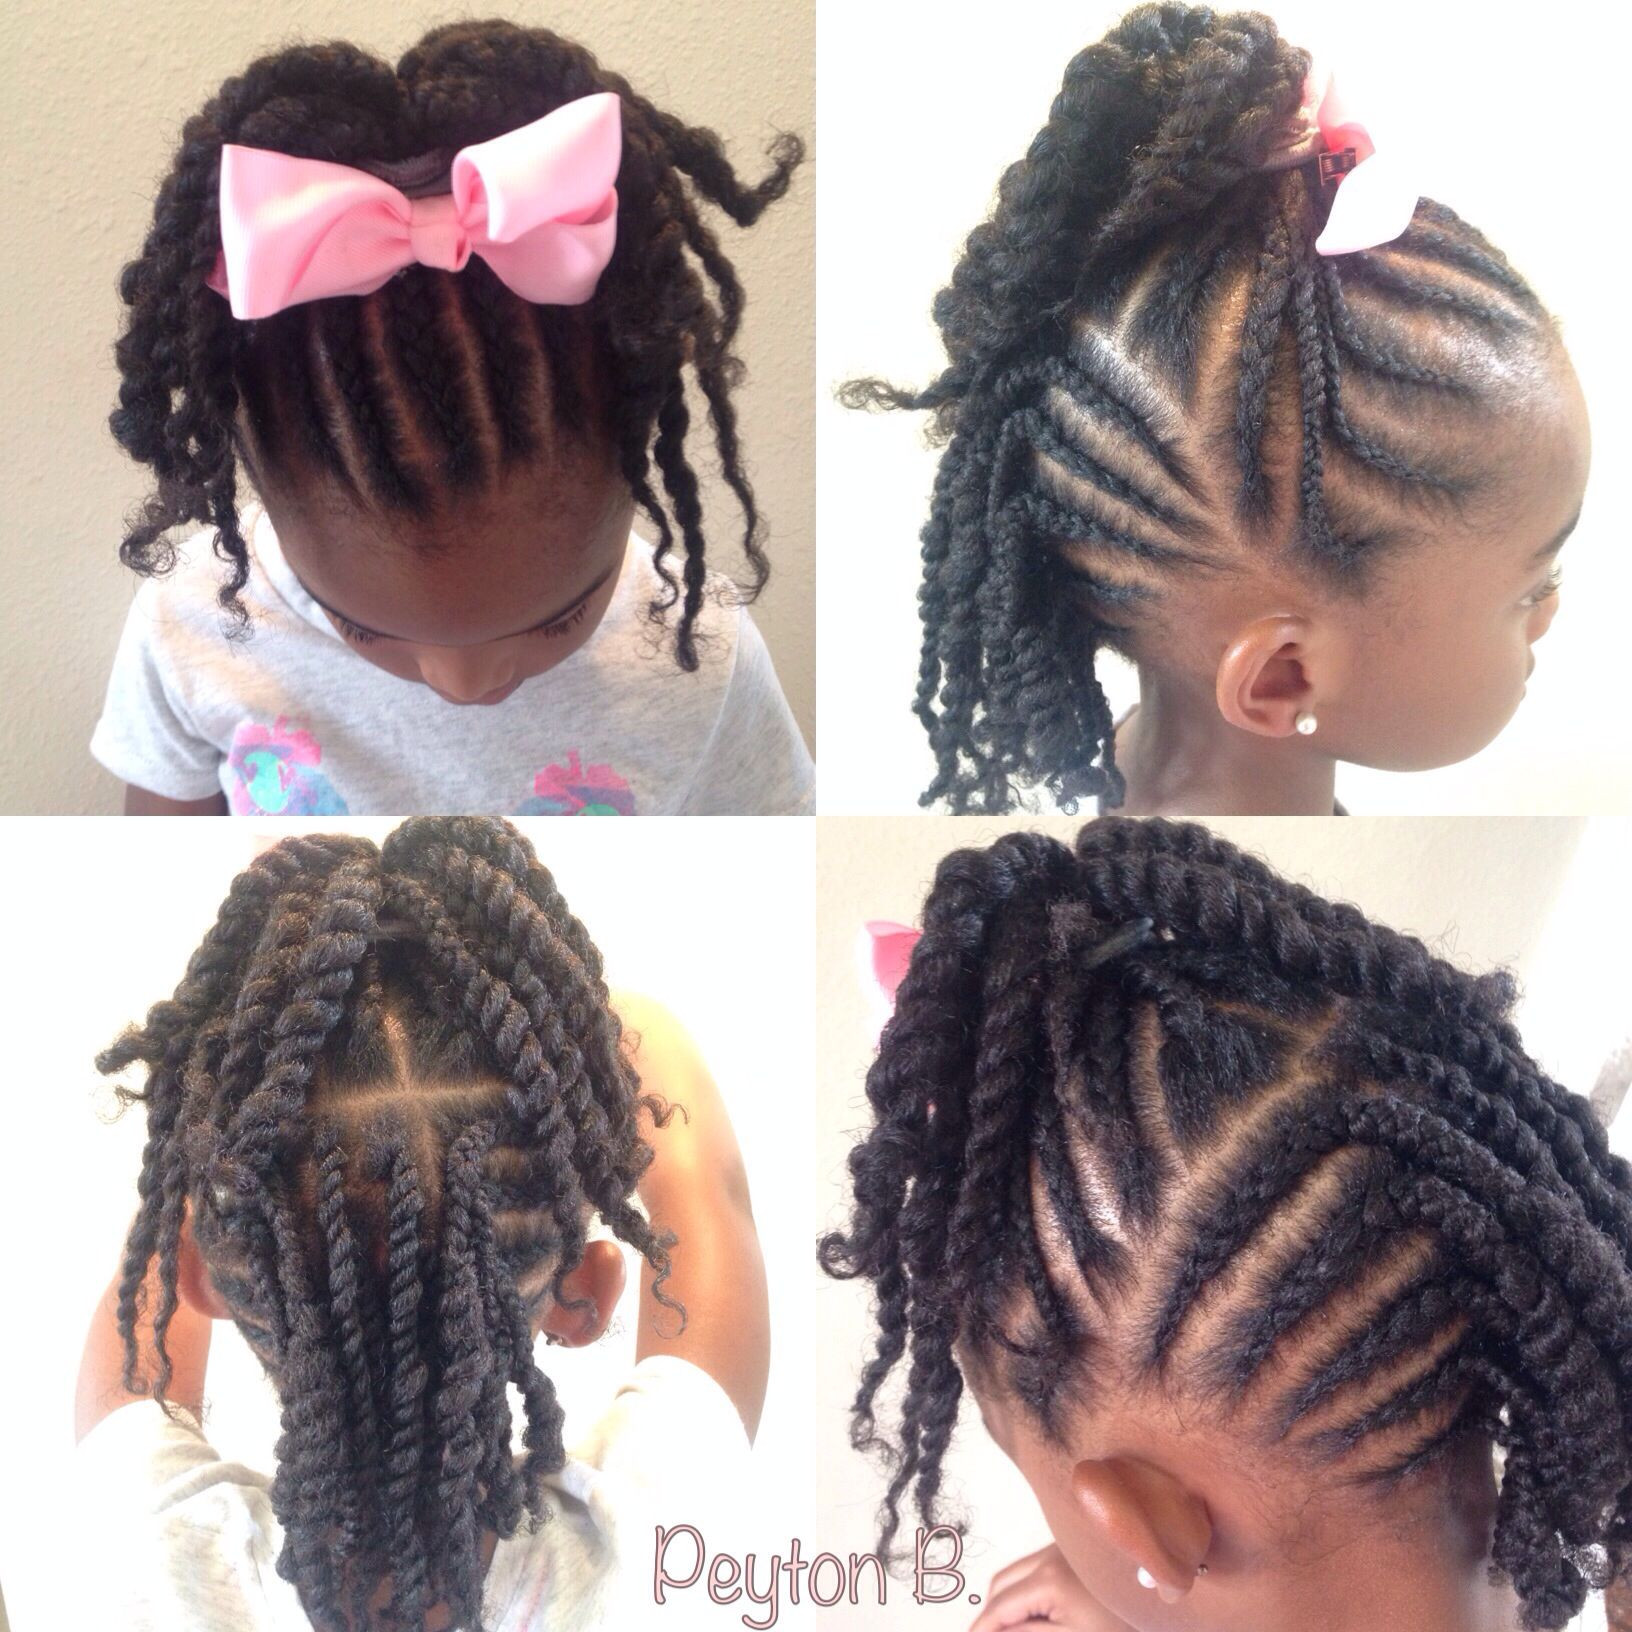 2Littlegirls_Hairstyles
 Top Cornrows with ends twisted up into ponytail Back